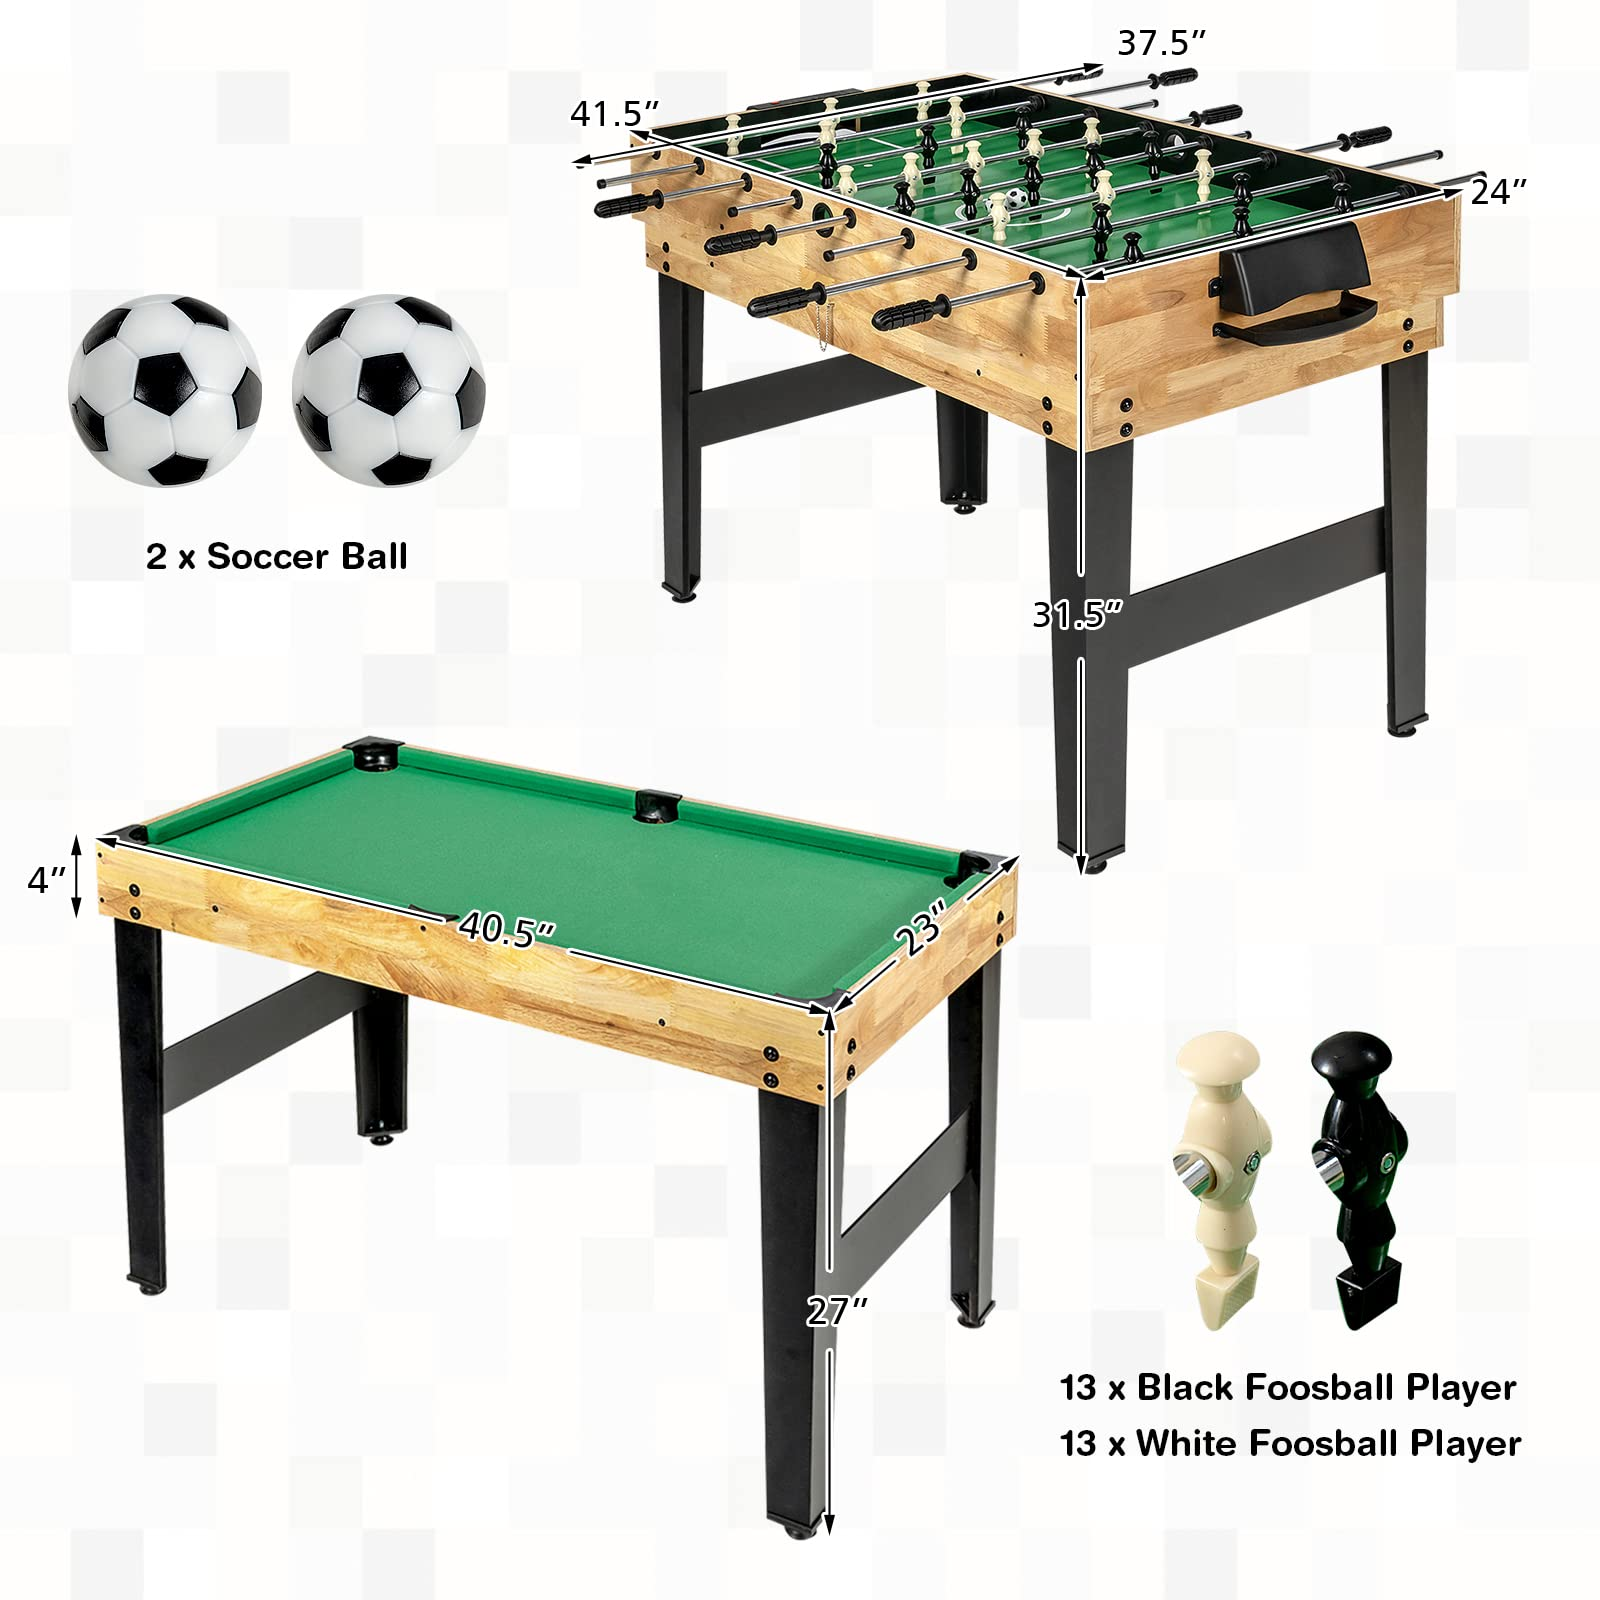 10-in-1 Multi Game Table, Combo Game Table Set w/Hockey - Giantex